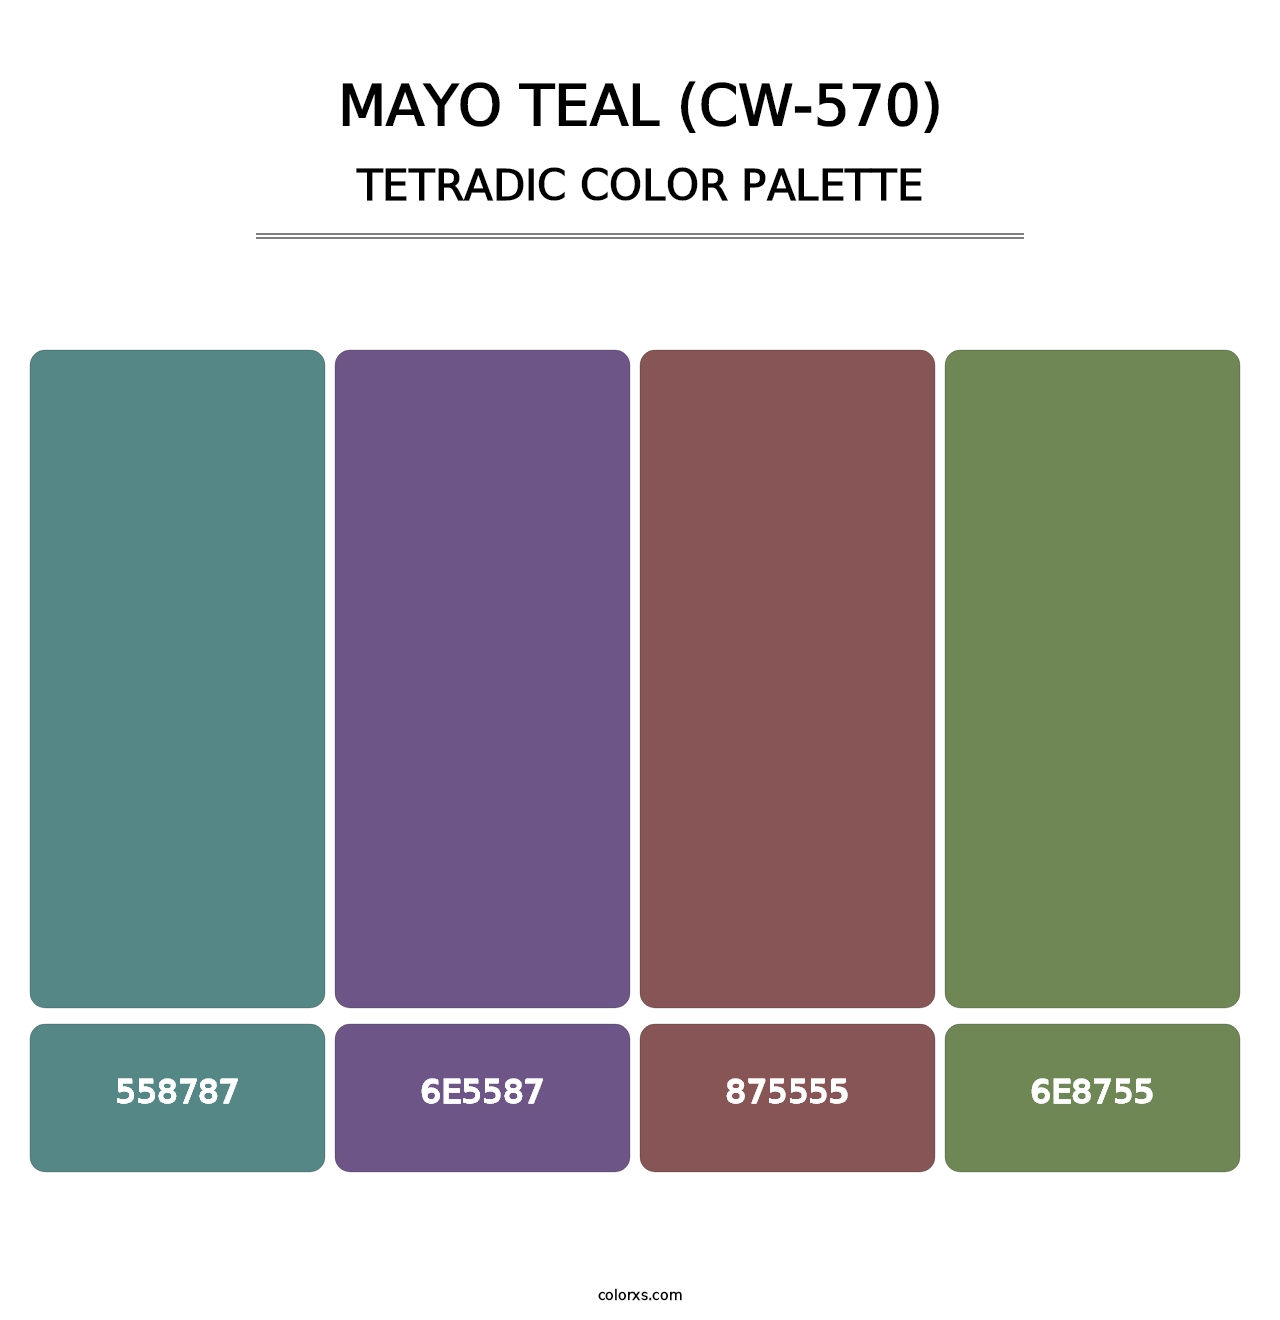 Mayo Teal (CW-570) - Tetradic Color Palette